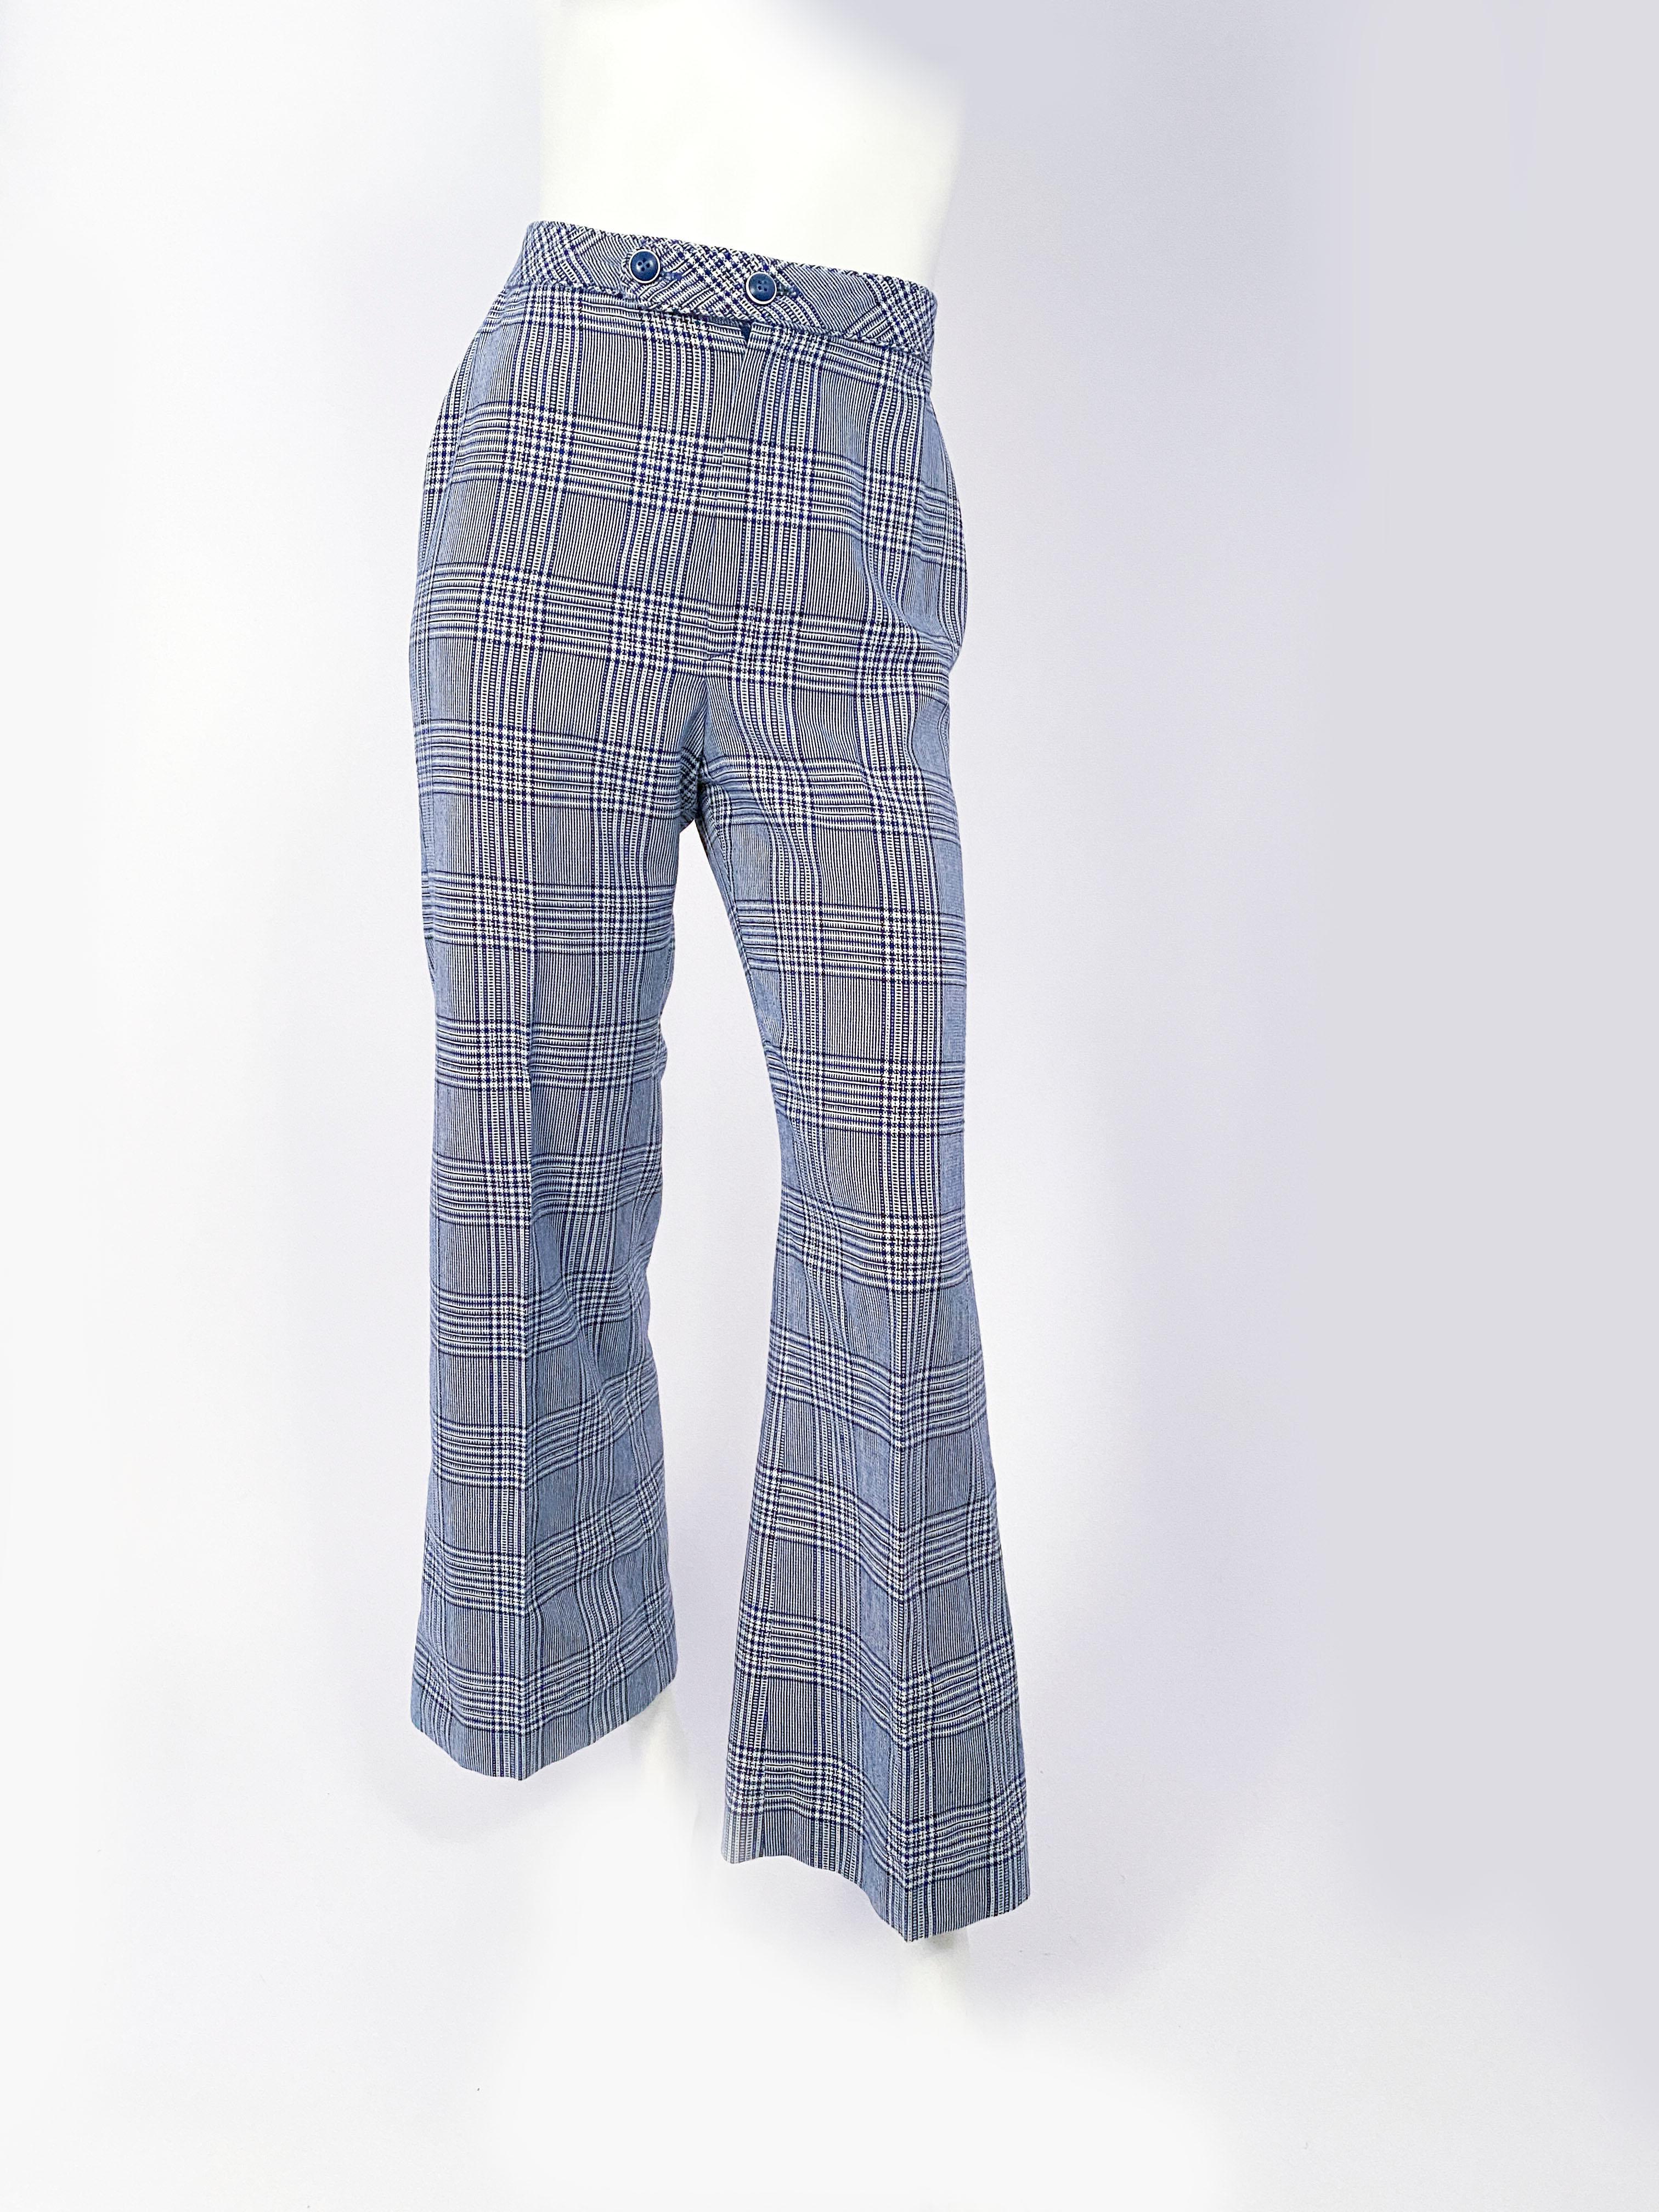 1970s Navy and White Plaid Mod Pant Suit 1